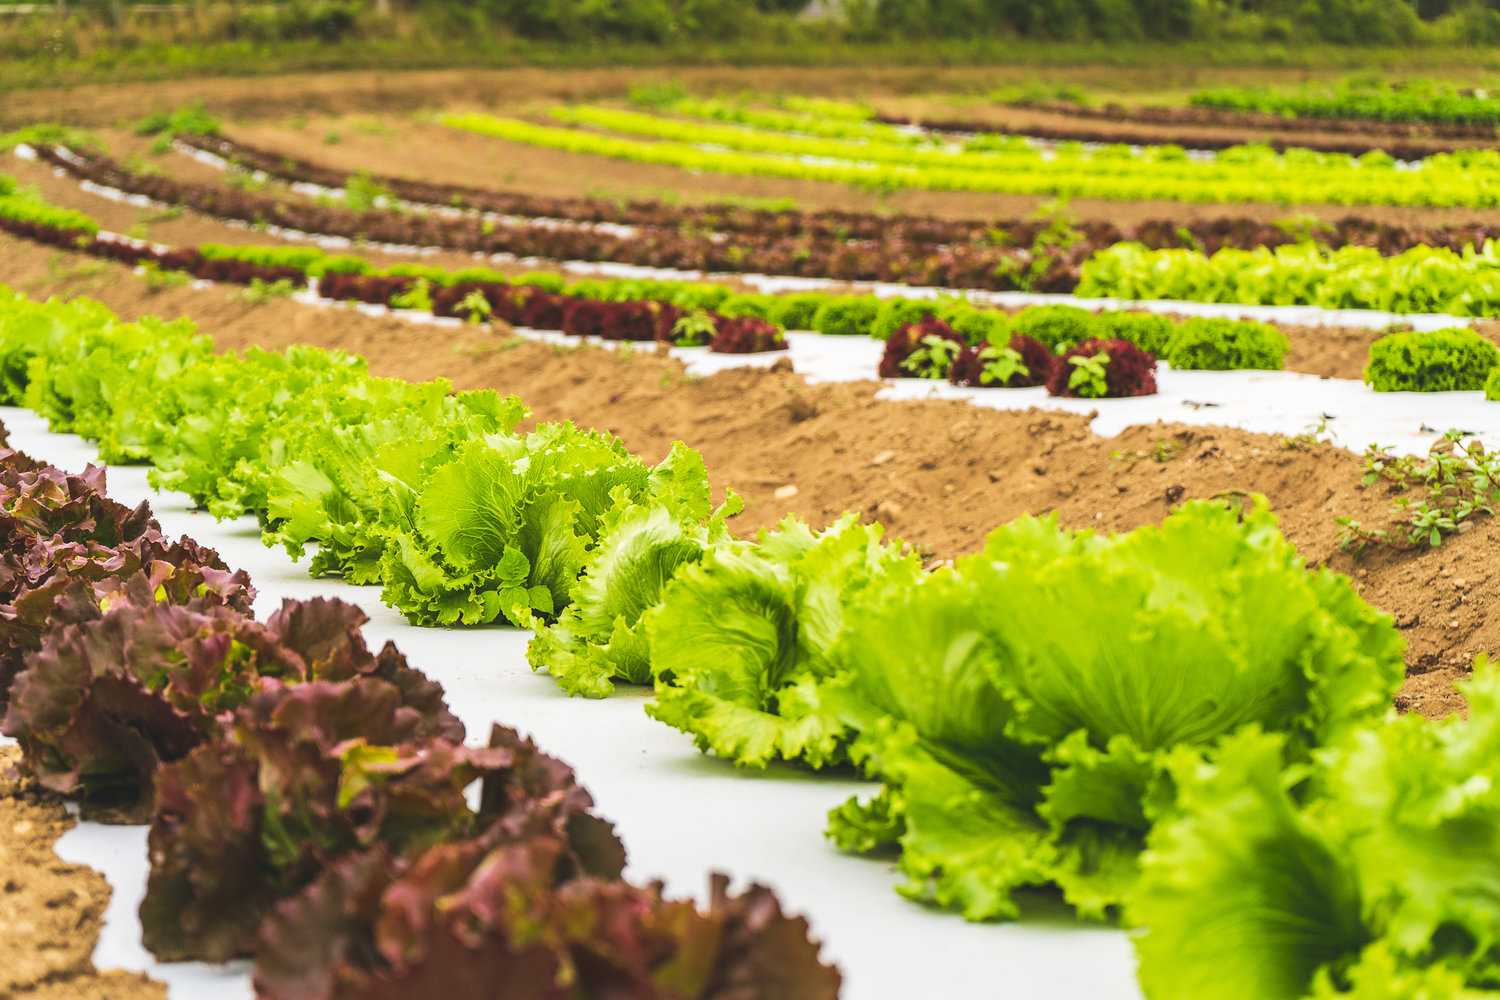 Rows of lettuce in a field at Bartlett’s Ocean View Farm in the summer of 2020.